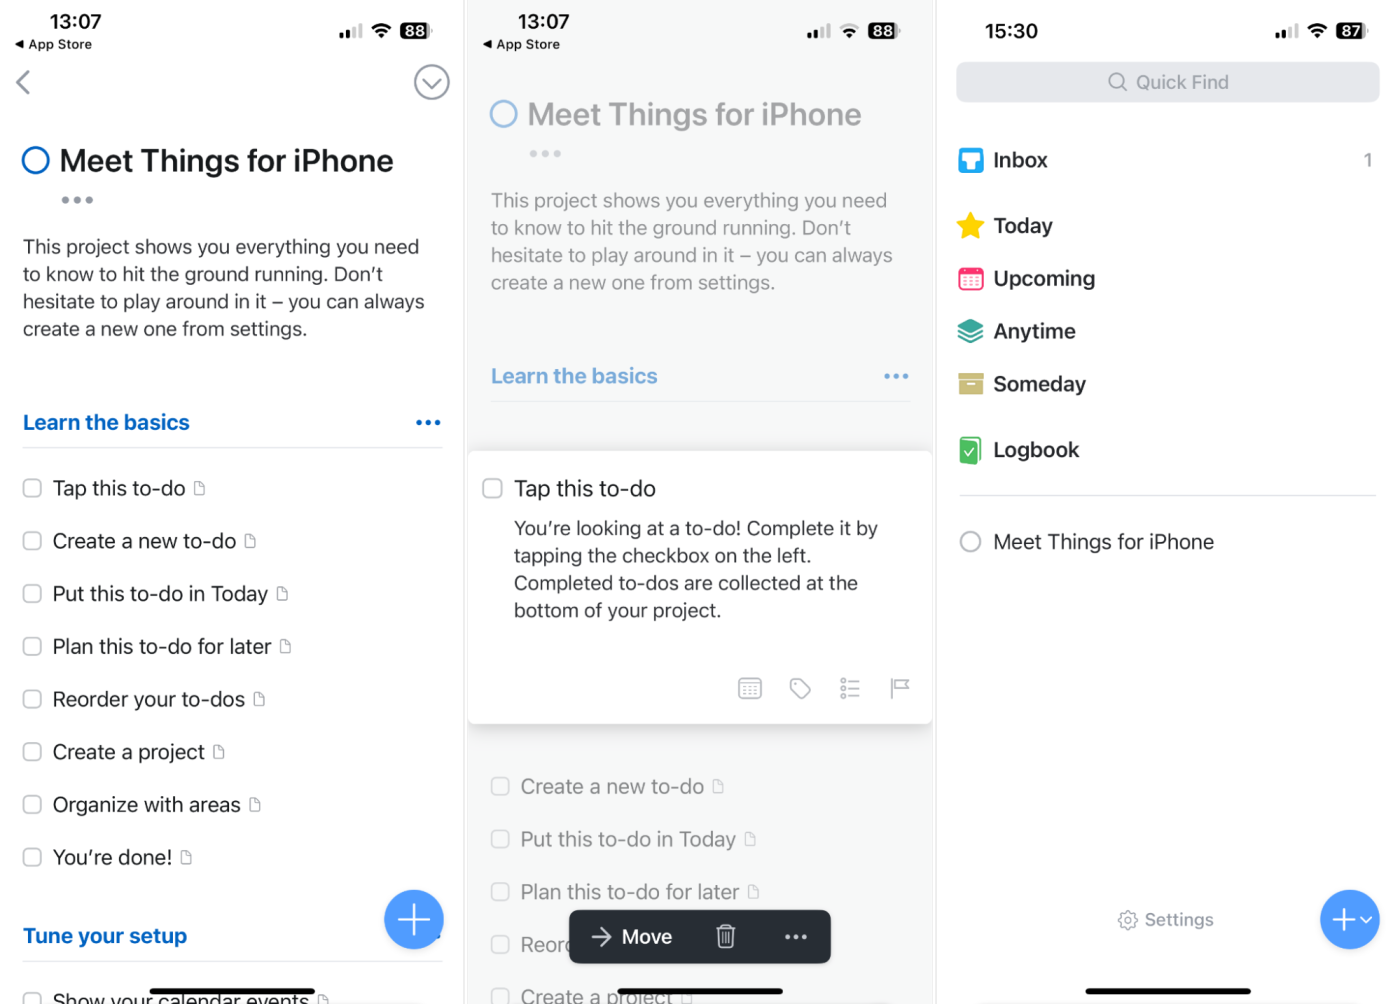 Things, our pick for the best iPhone productivity app for tracking tasks